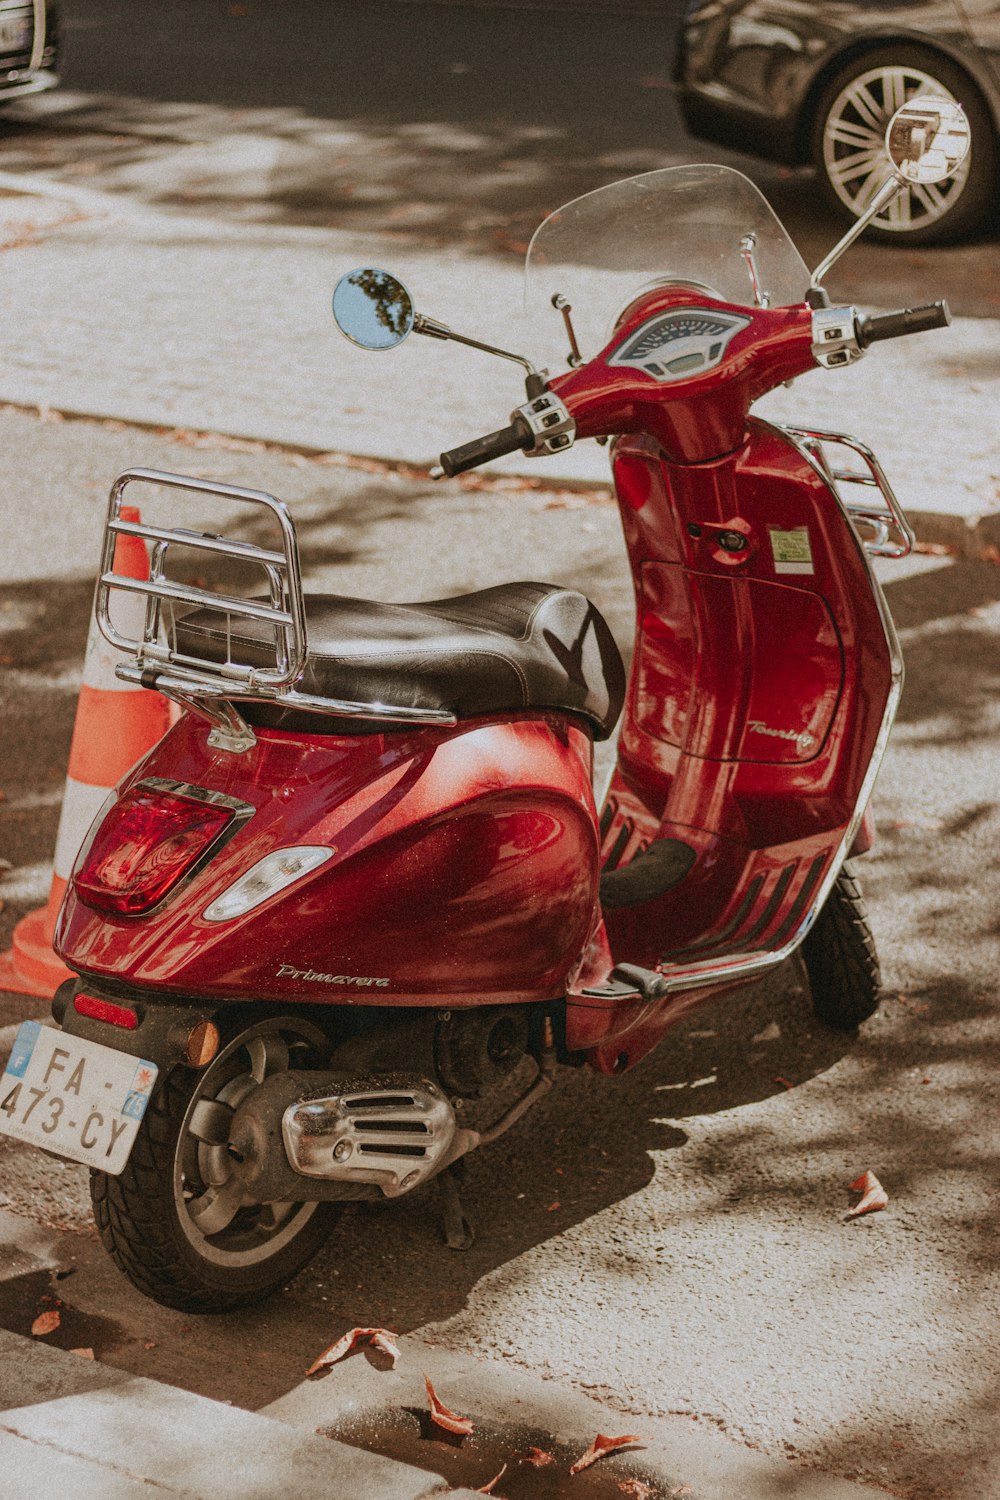 red and black motor scooter parked on gray concrete pavement during daytime